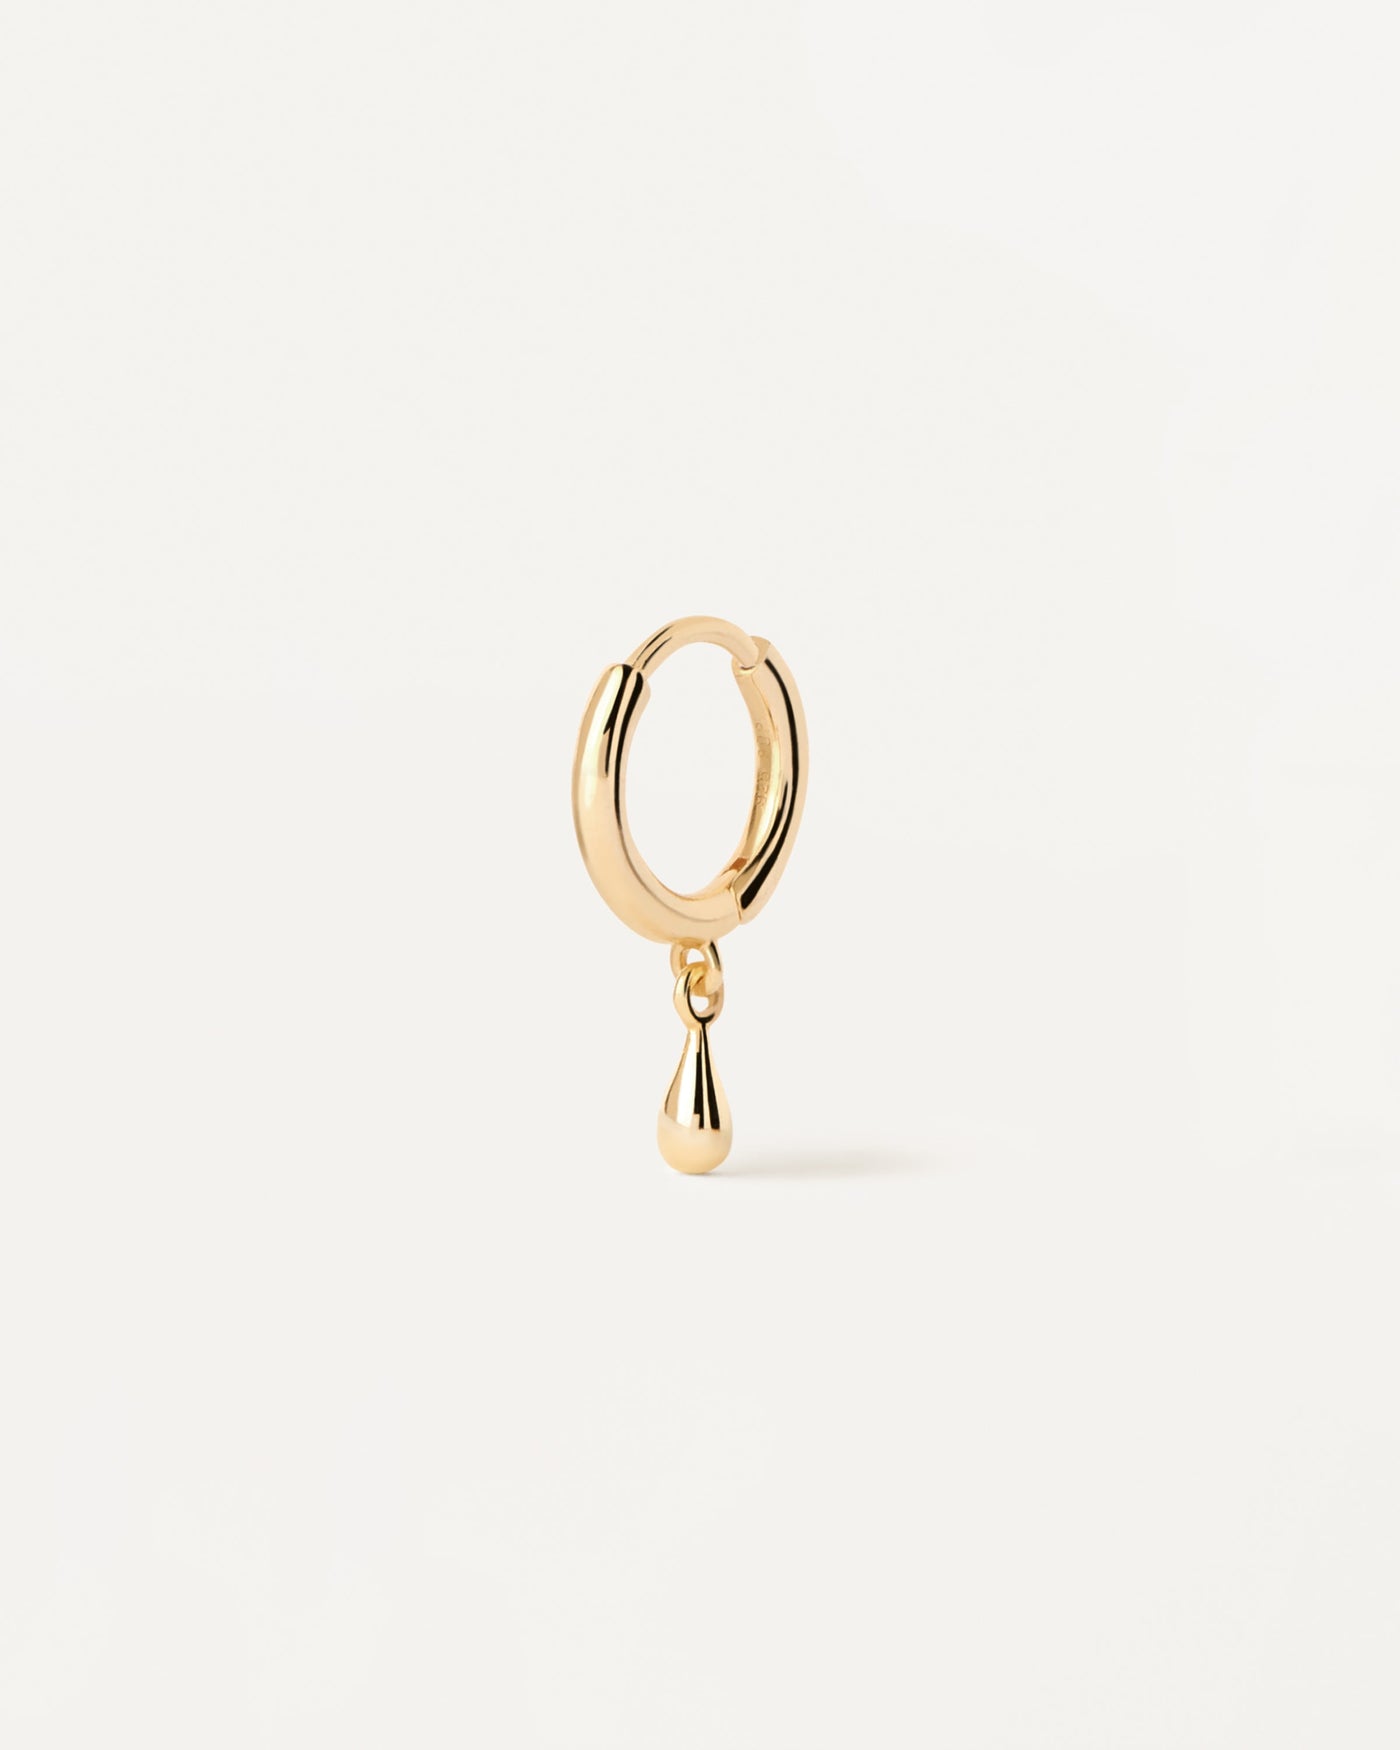 2023 Selection | Teardrop Single Hoop Earring. Gold-plated silver ear piercing with small drop pendant. Get the latest arrival from PDPAOLA. Place your order safely and get this Best Seller. Free Shipping.